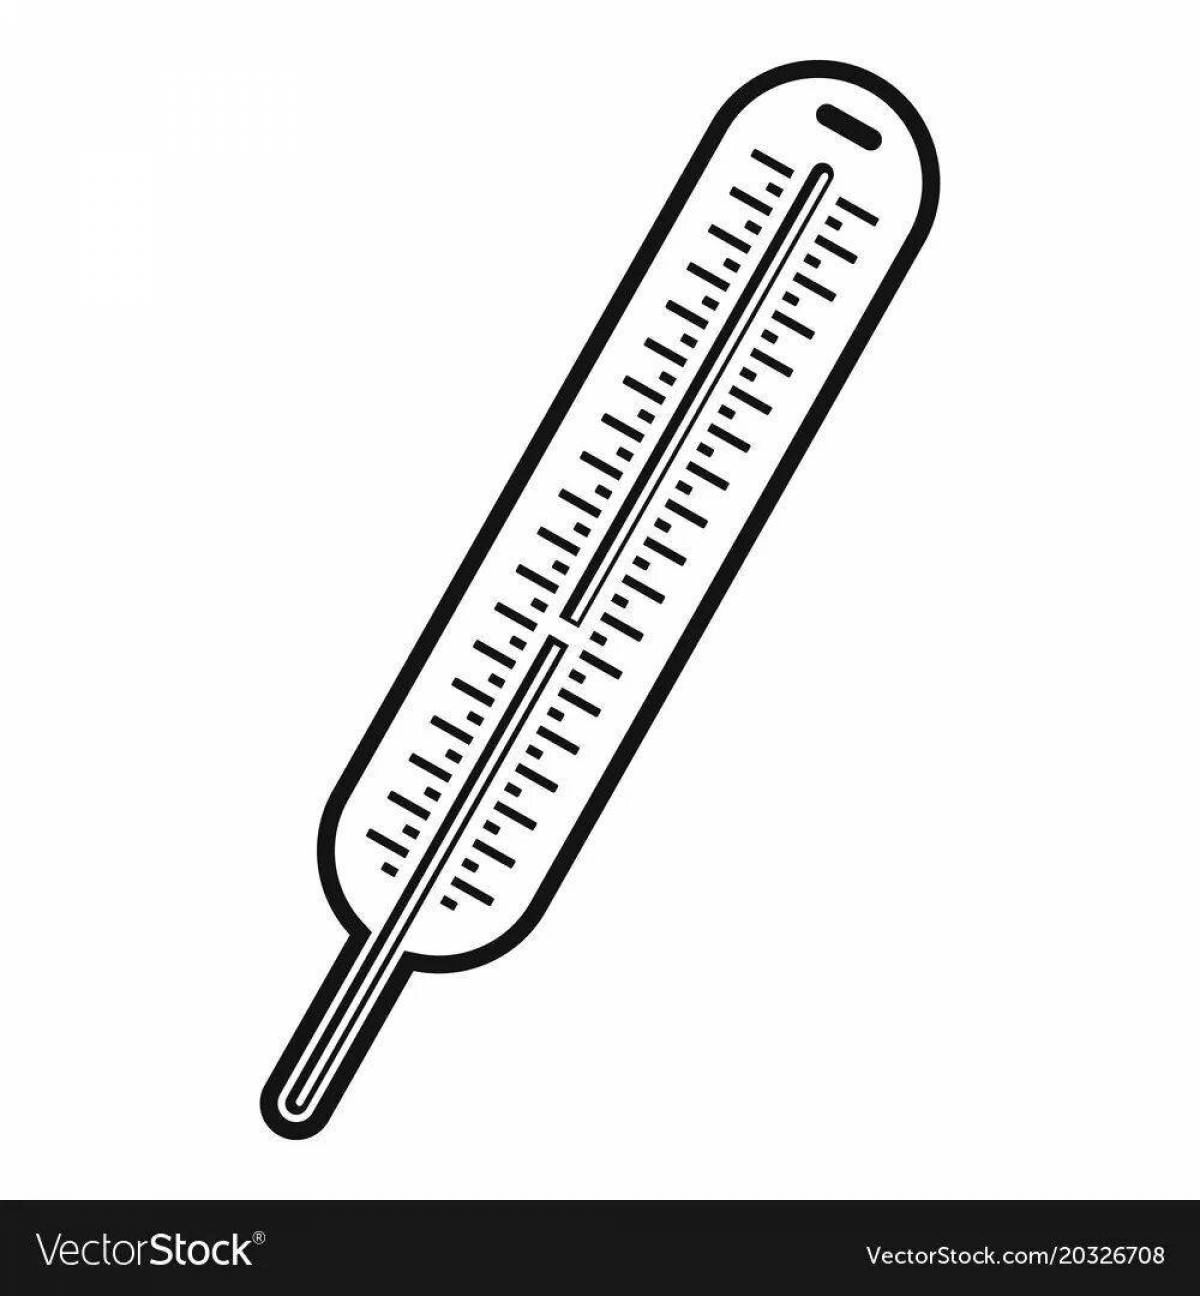 Children's thermometer coloring book